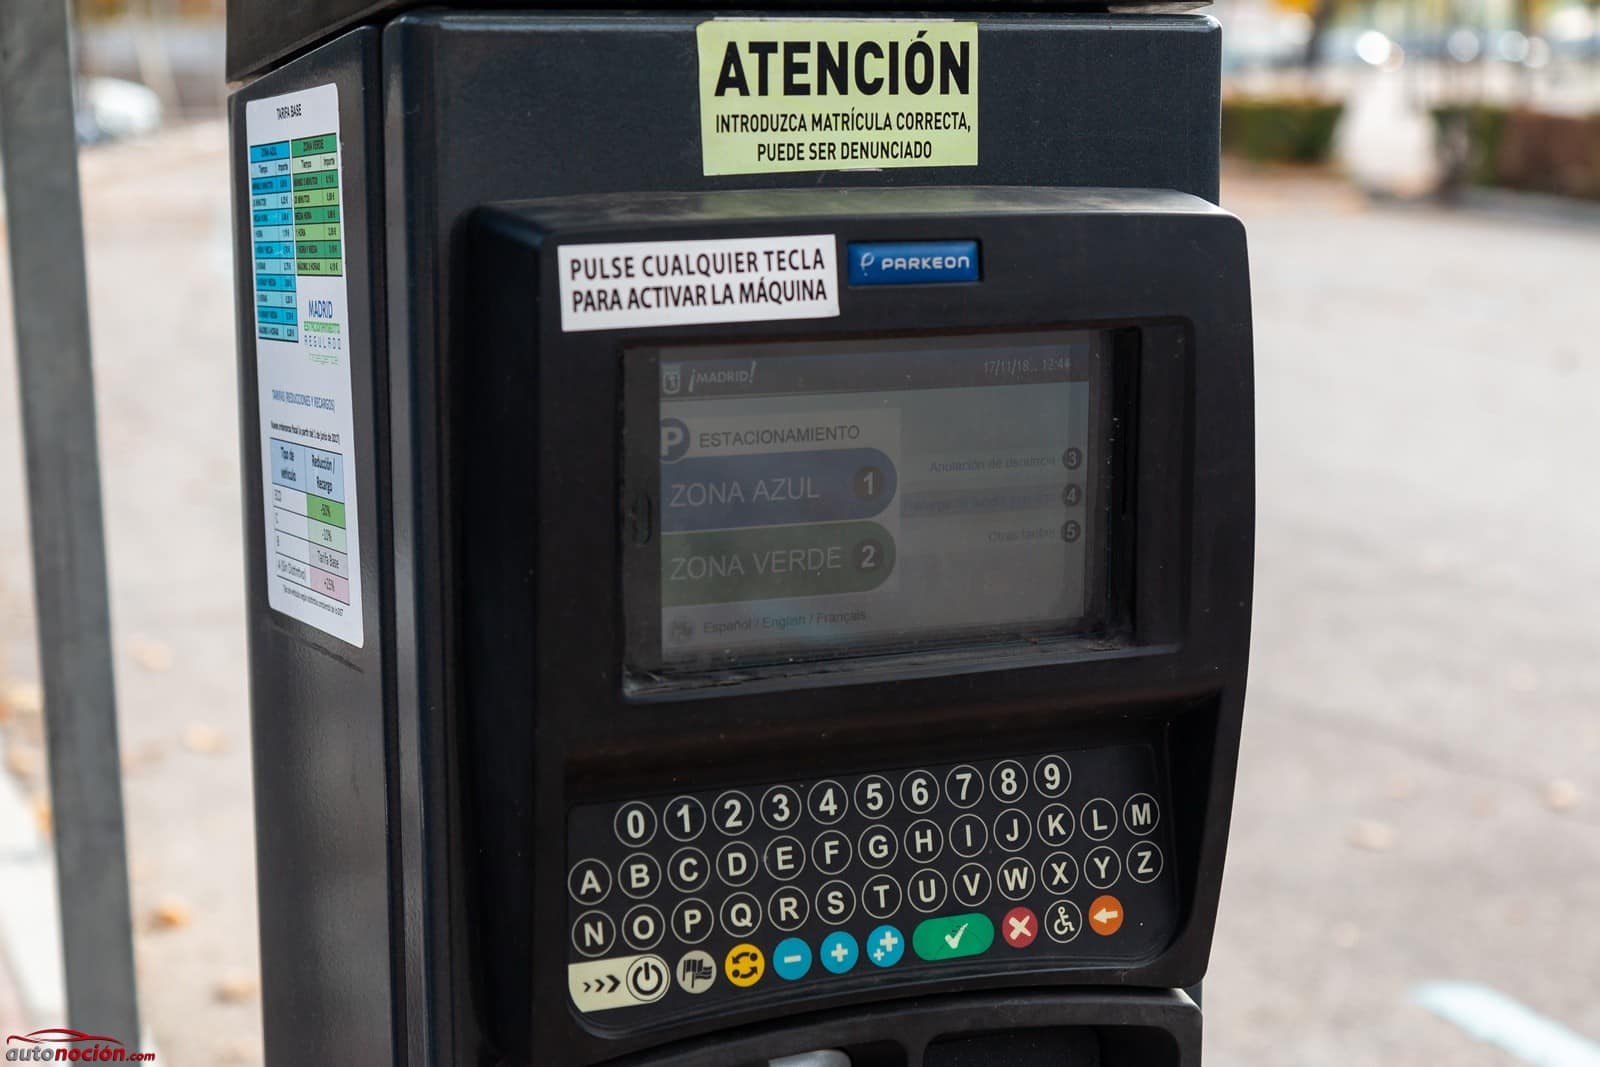 The dynamic rate of the SER arrives: more expensive parking meters